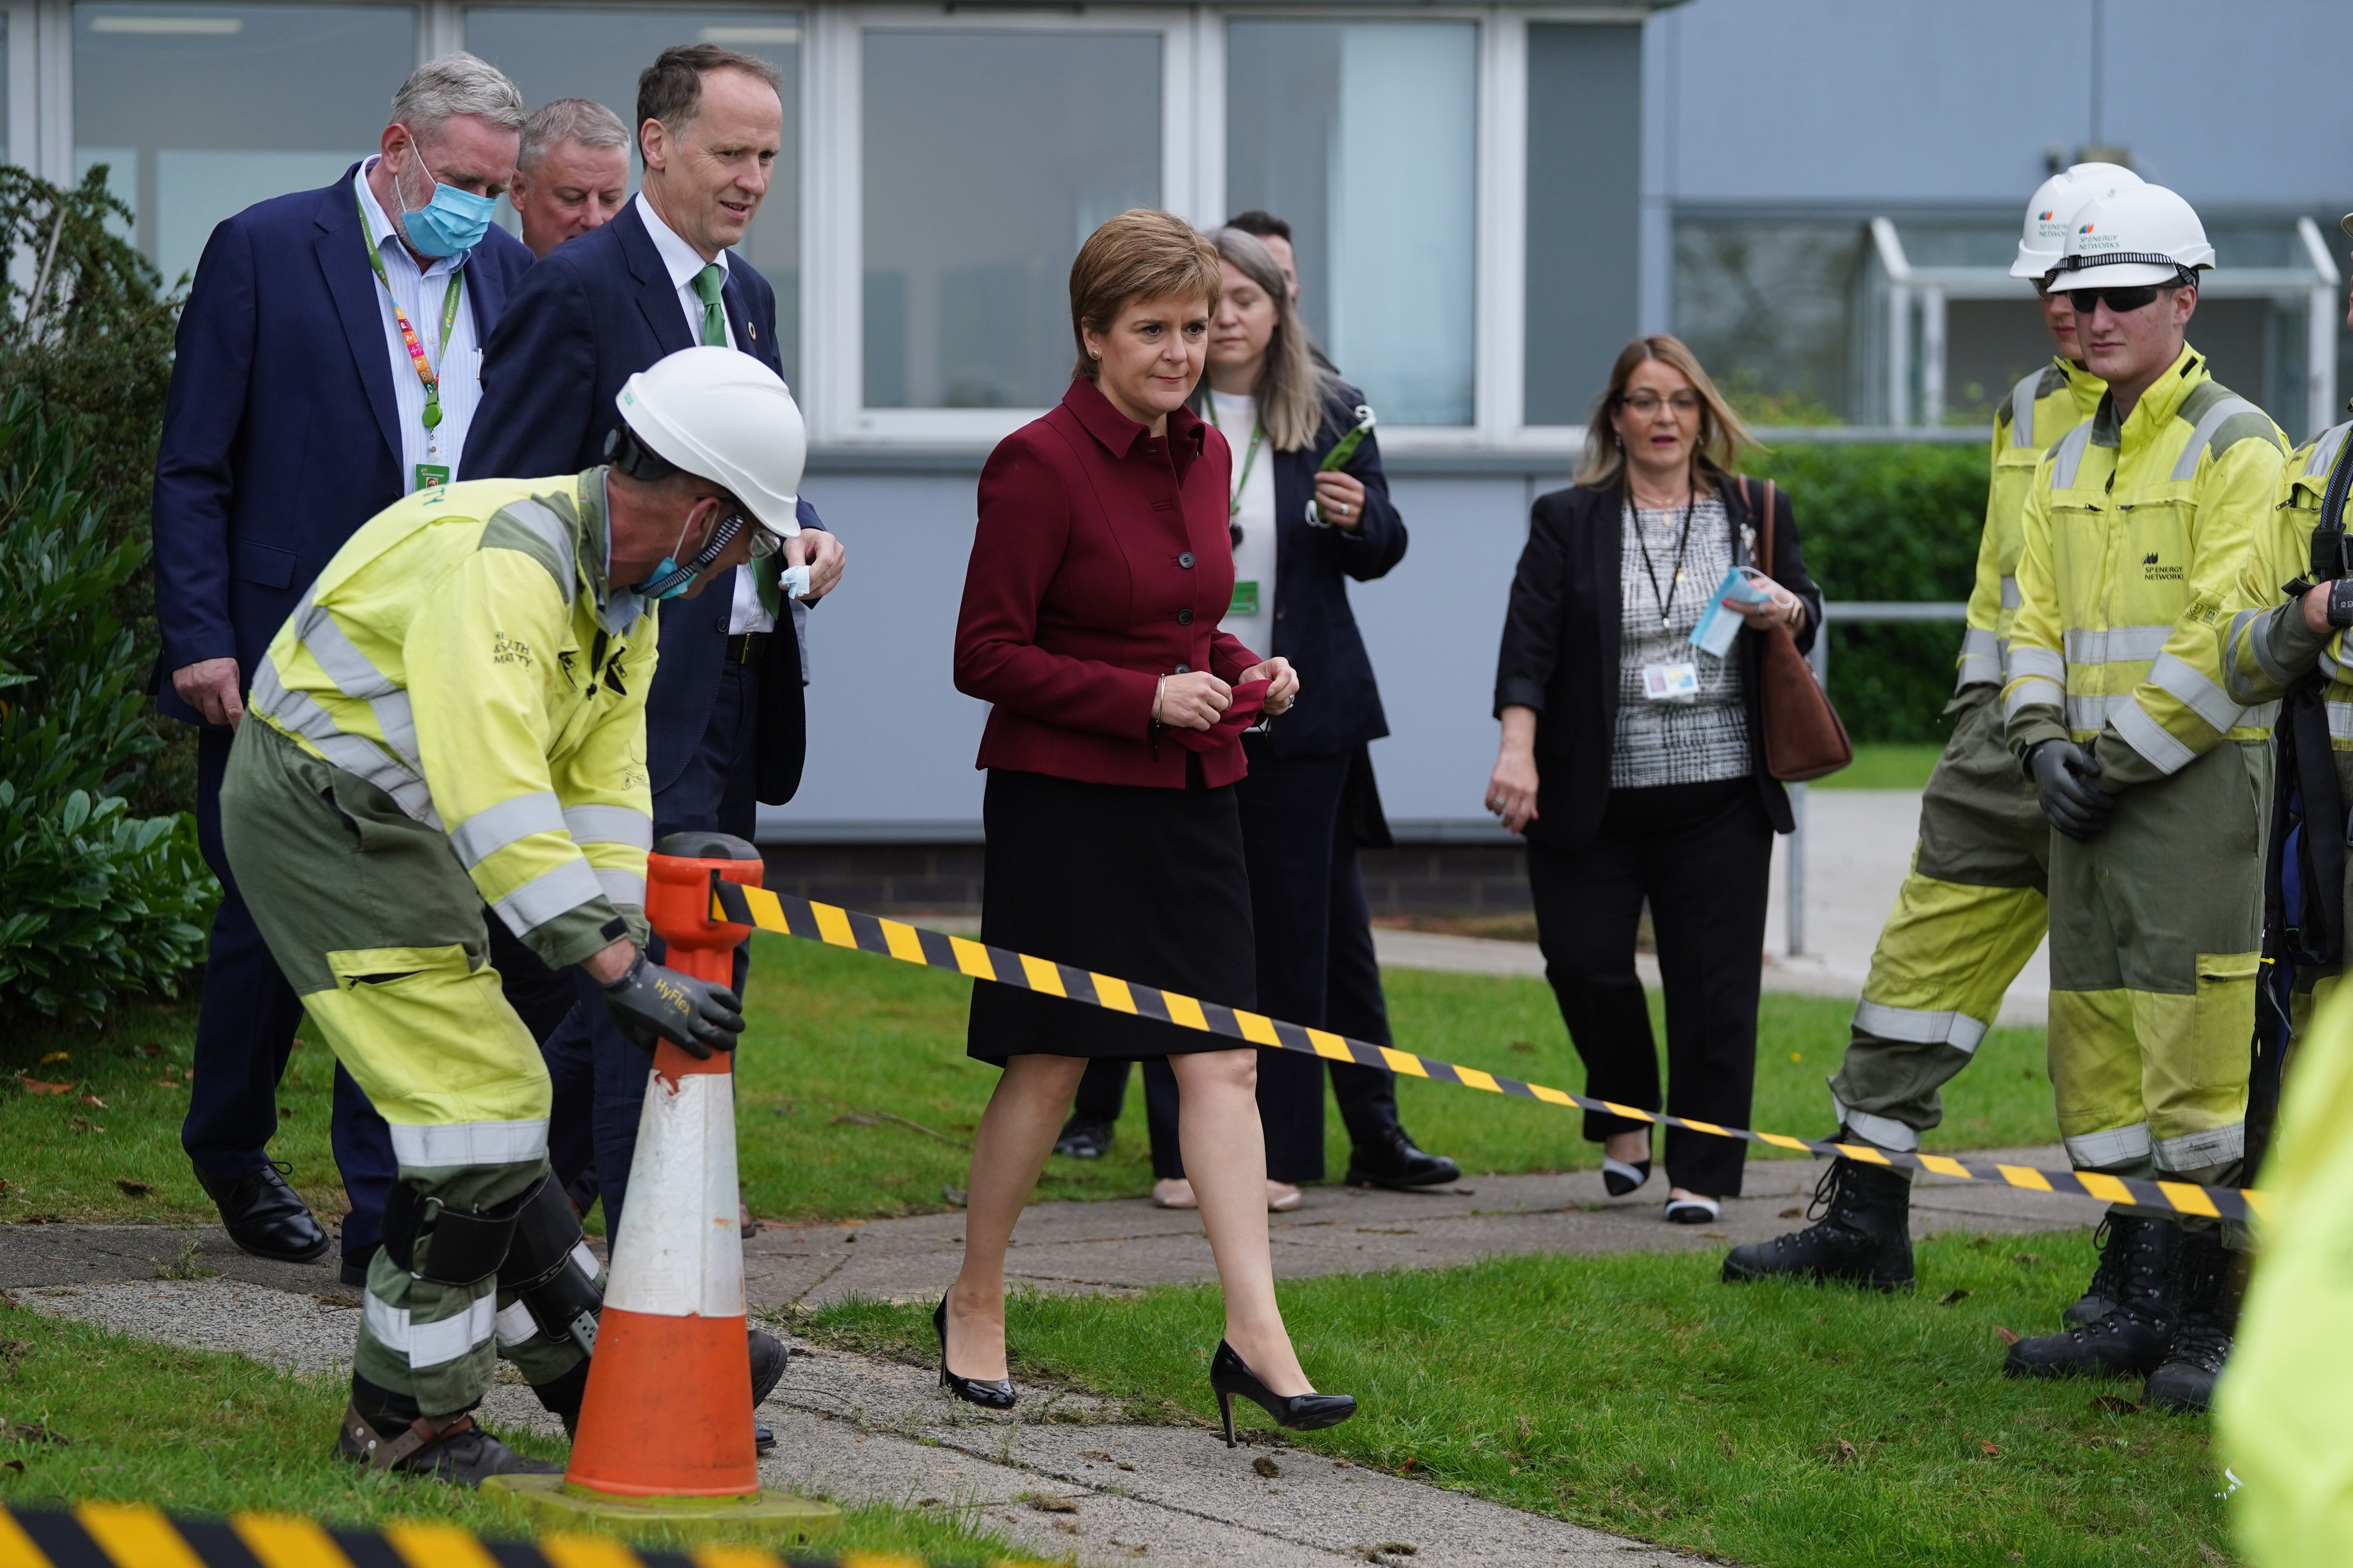 Nicola Sturgeon launched the Green Jobs Workforce Academy during her visit to the Scottish Power training centre in Cumbernauld (Andrew Milligan/PA)